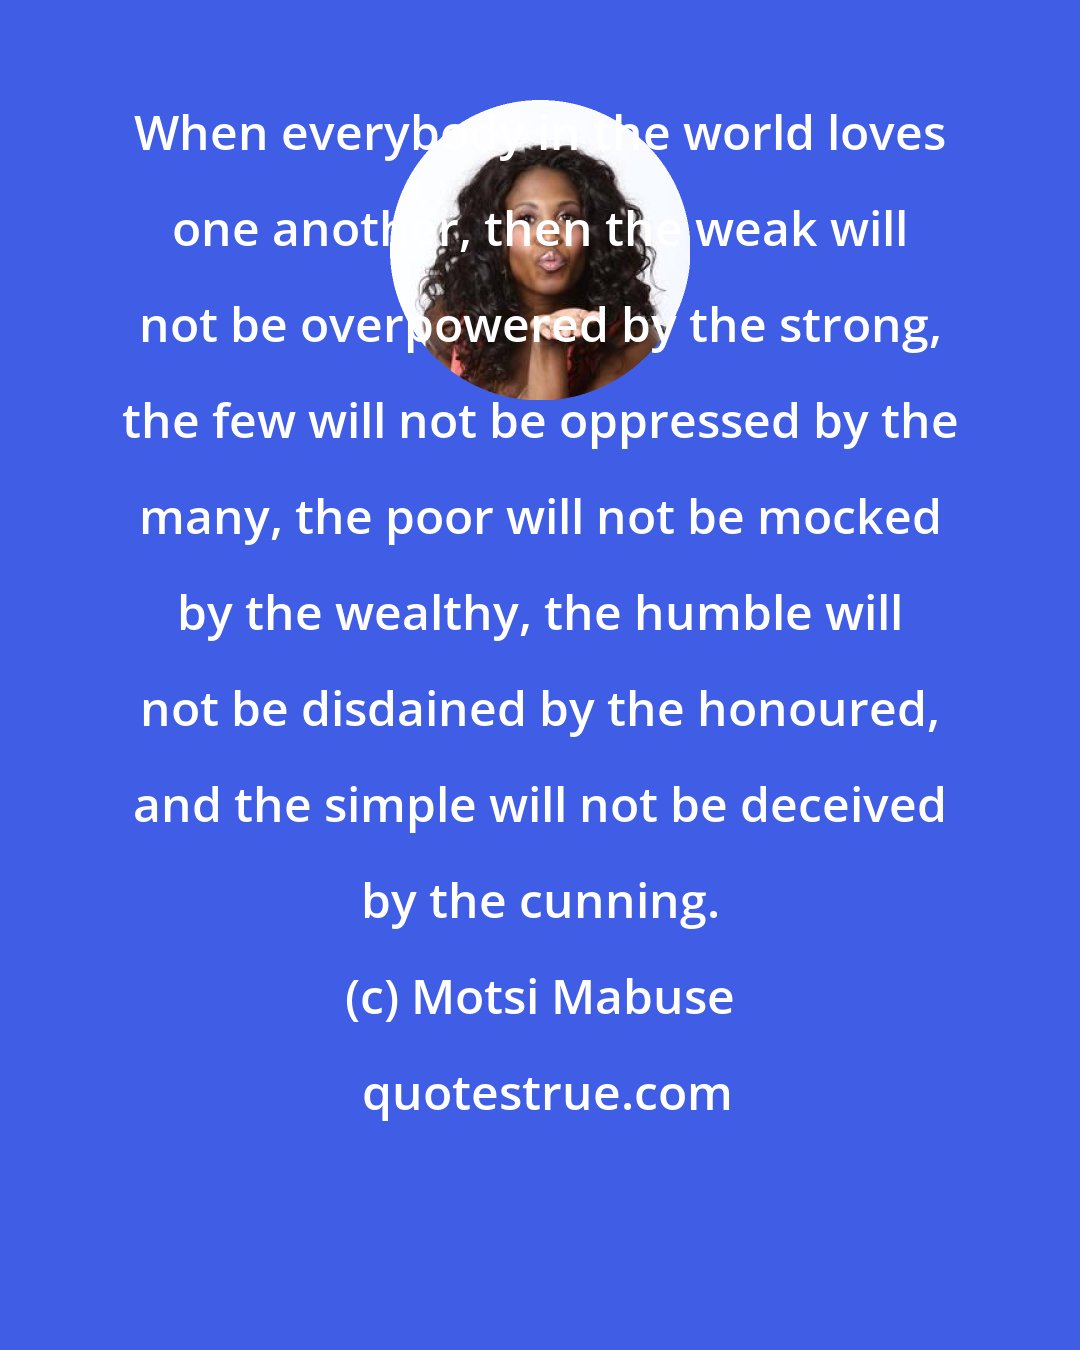 Motsi Mabuse: When everybody in the world loves one another, then the weak will not be overpowered by the strong, the few will not be oppressed by the many, the poor will not be mocked by the wealthy, the humble will not be disdained by the honoured, and the simple will not be deceived by the cunning.